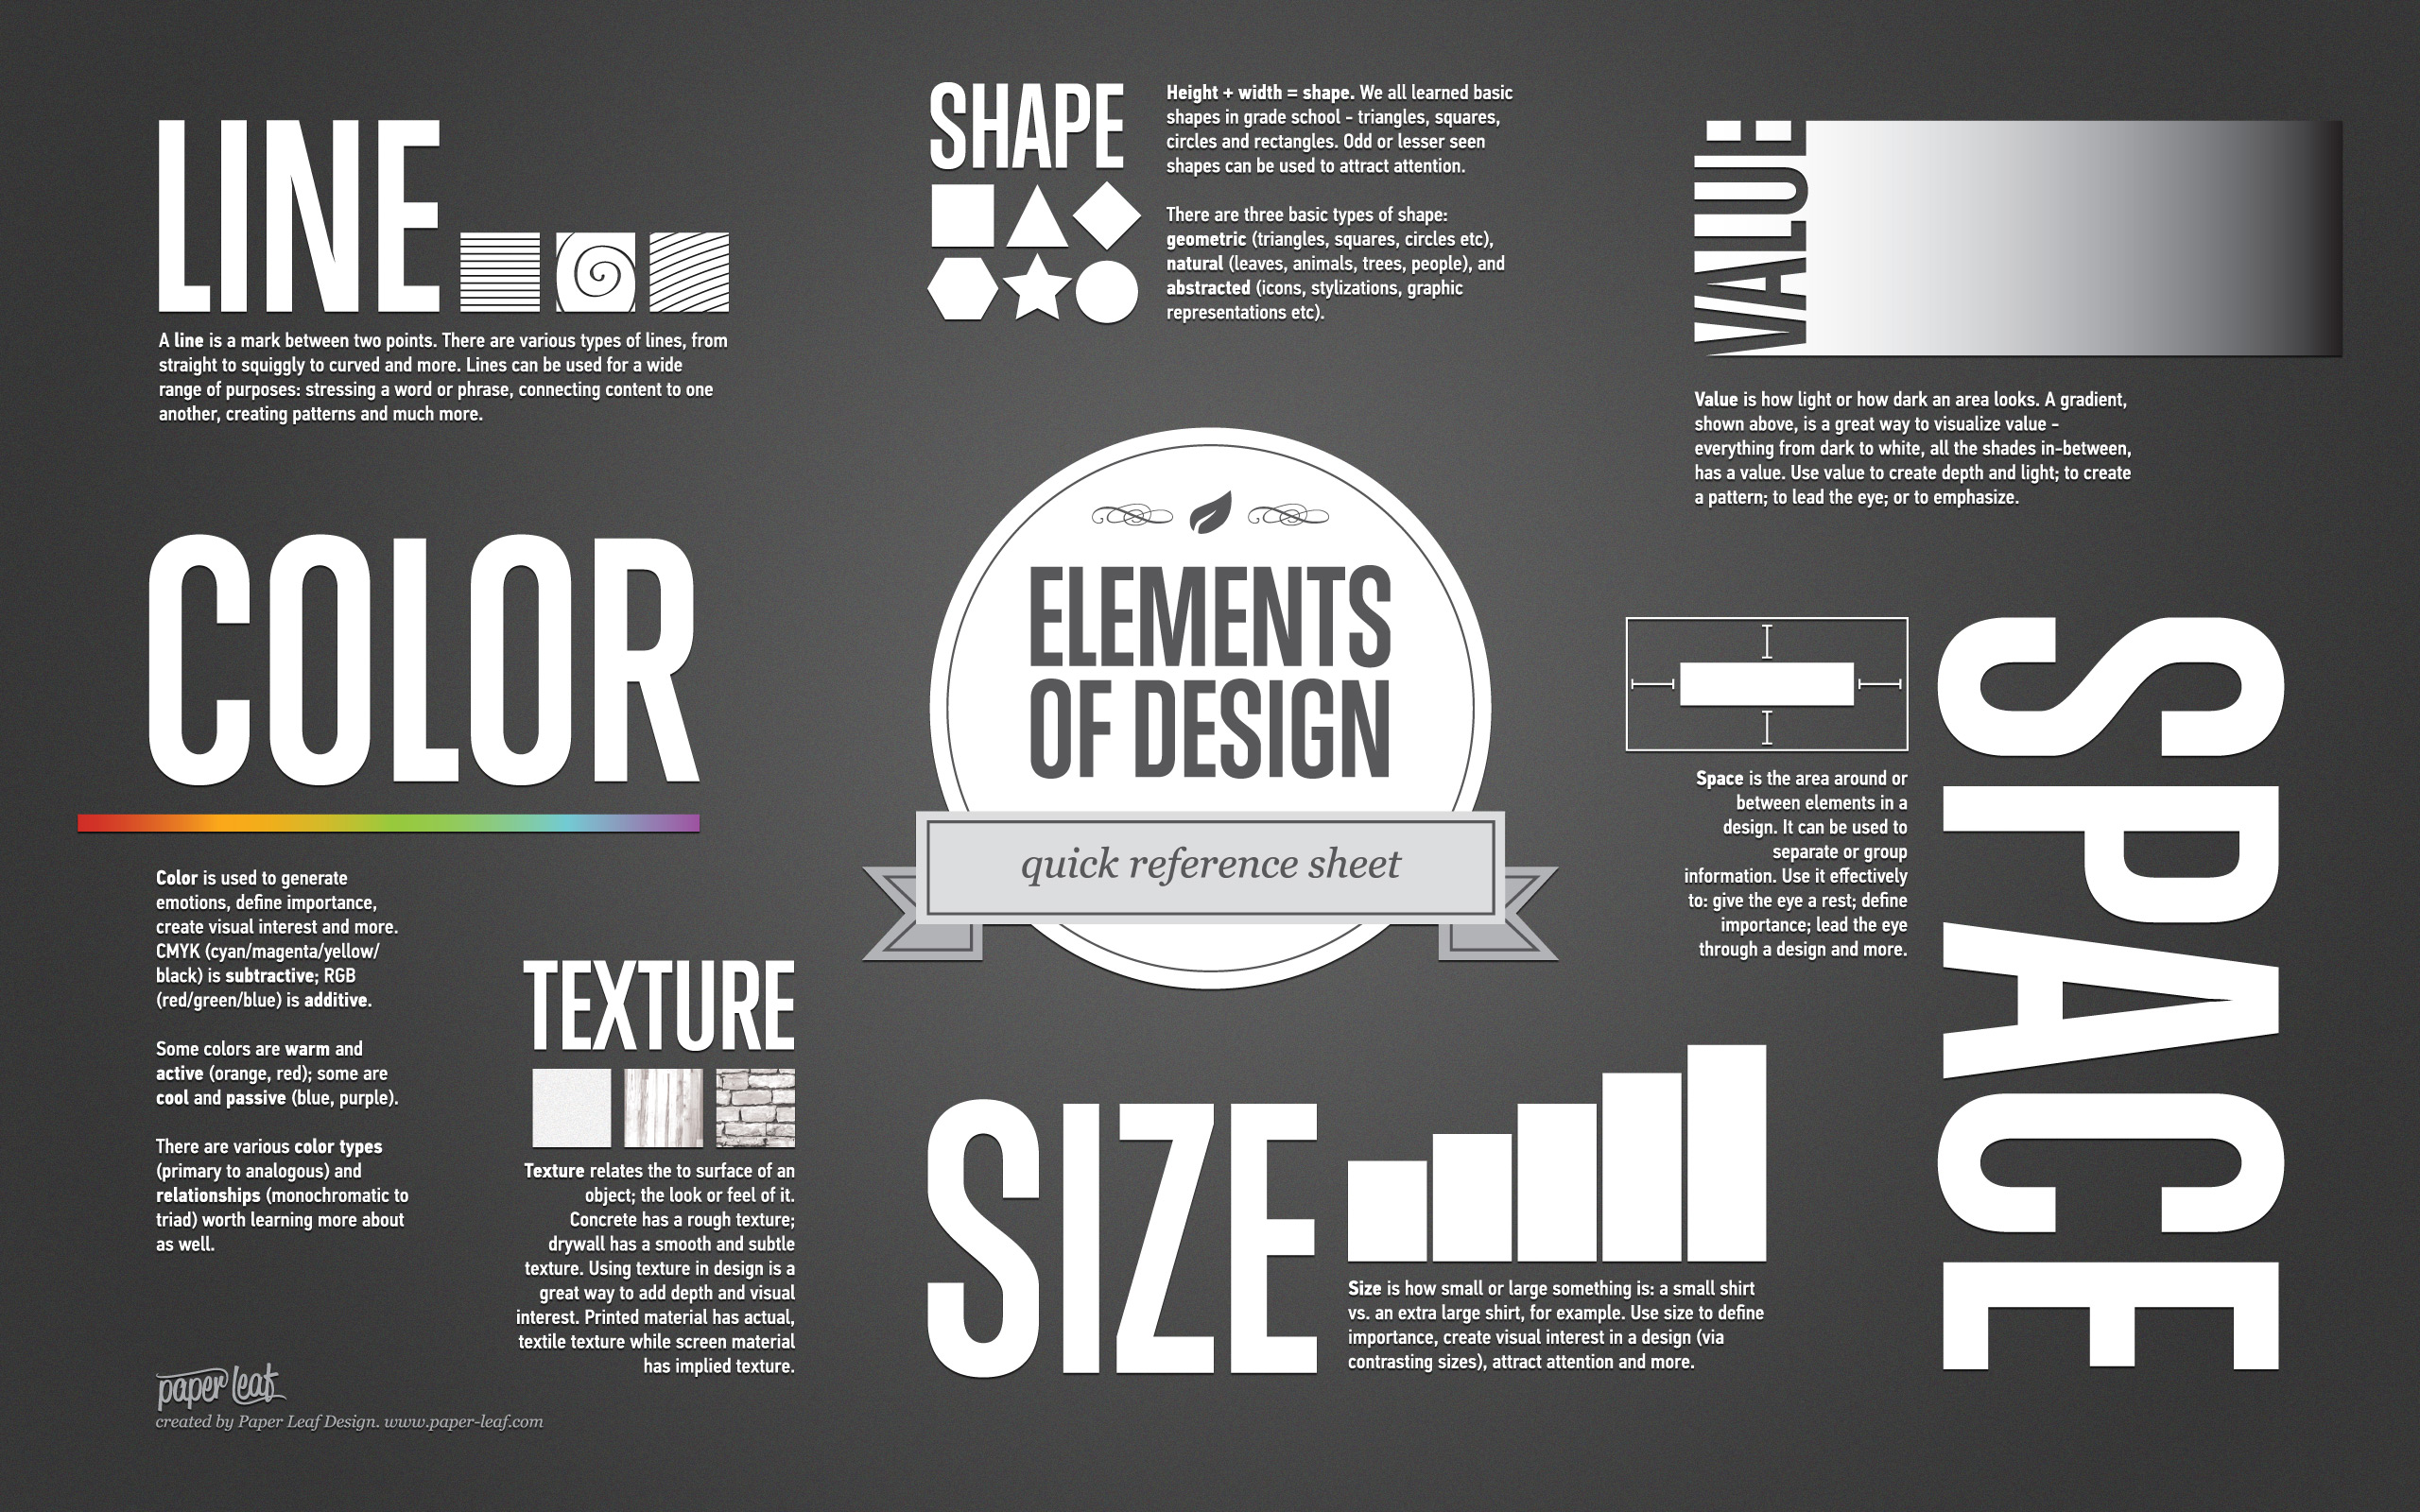 Book review: the elements of Graphic Design